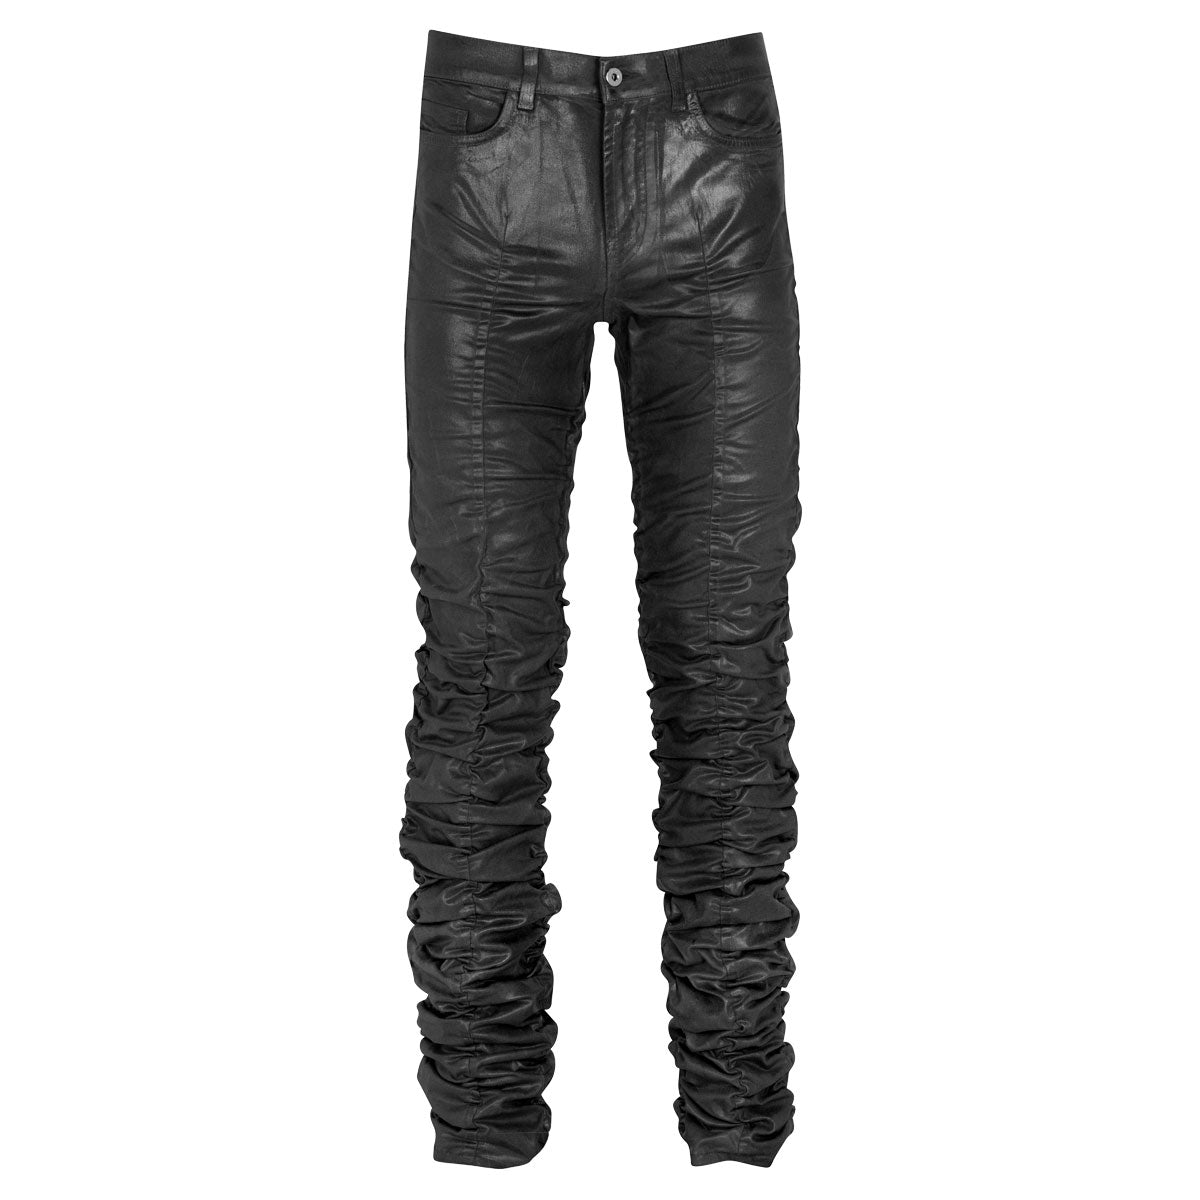 High Street Retro Black Stacked Jeans Mens With Heavy Industry Hole, Frayed  Destruction, Waxed Finish, Straight Ripped Pencil Pants, Oversized Denim  Trousers 230827 From Cong02, $27.97